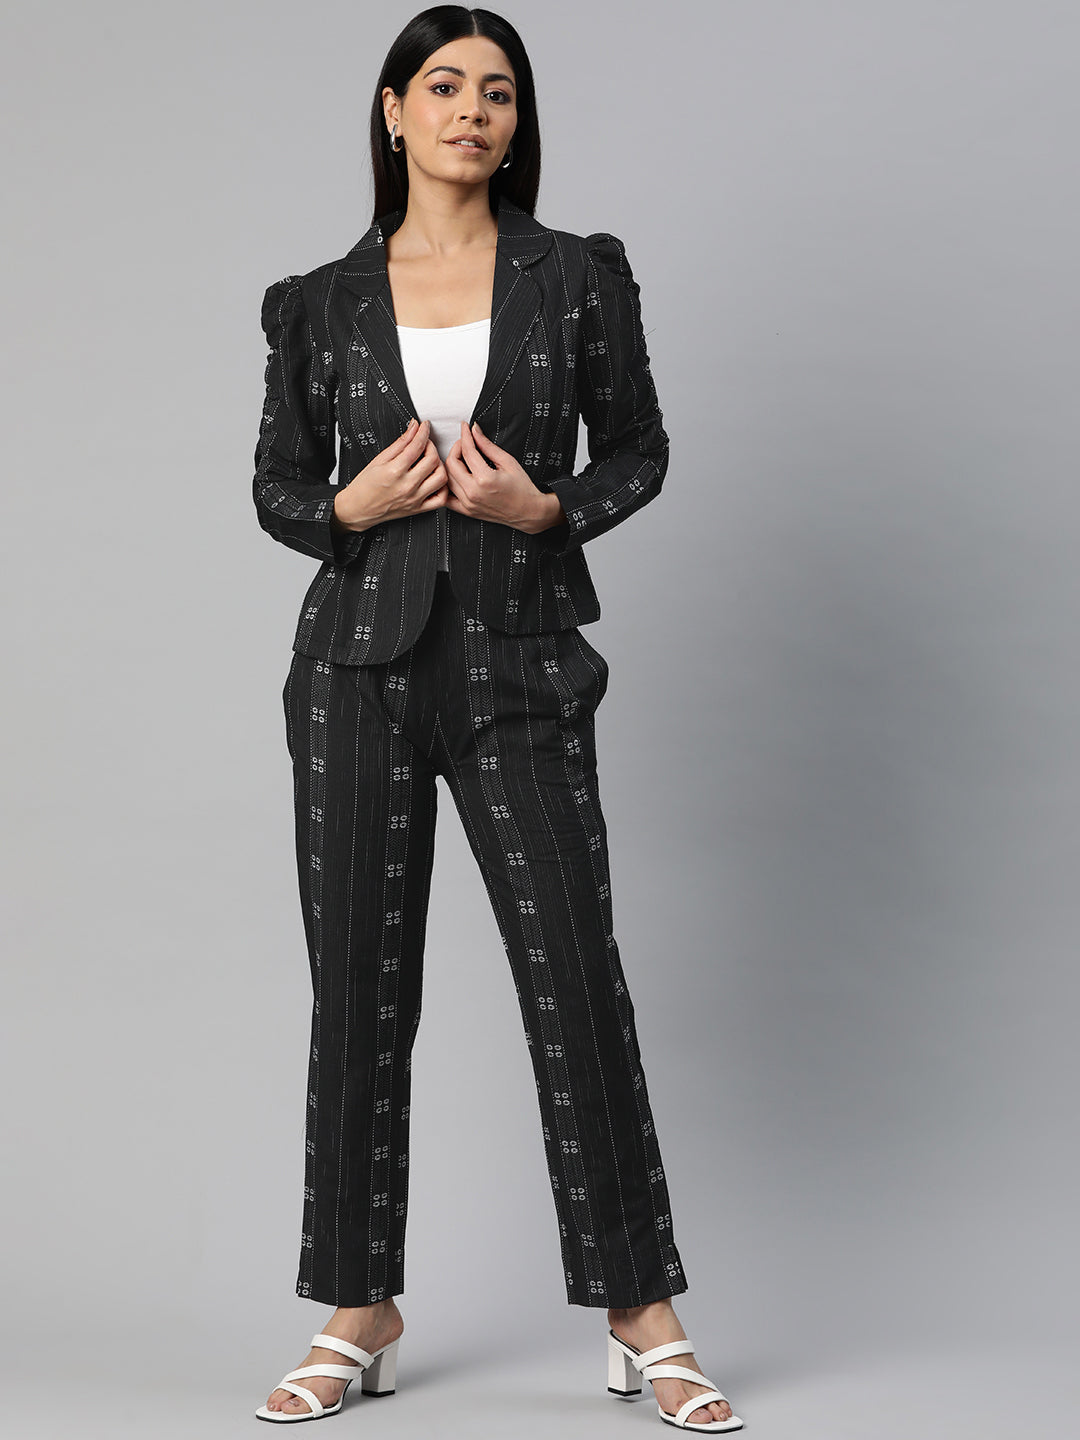 Cottinfab Embroidered Pure Cotton Two-Piece Formal Suit